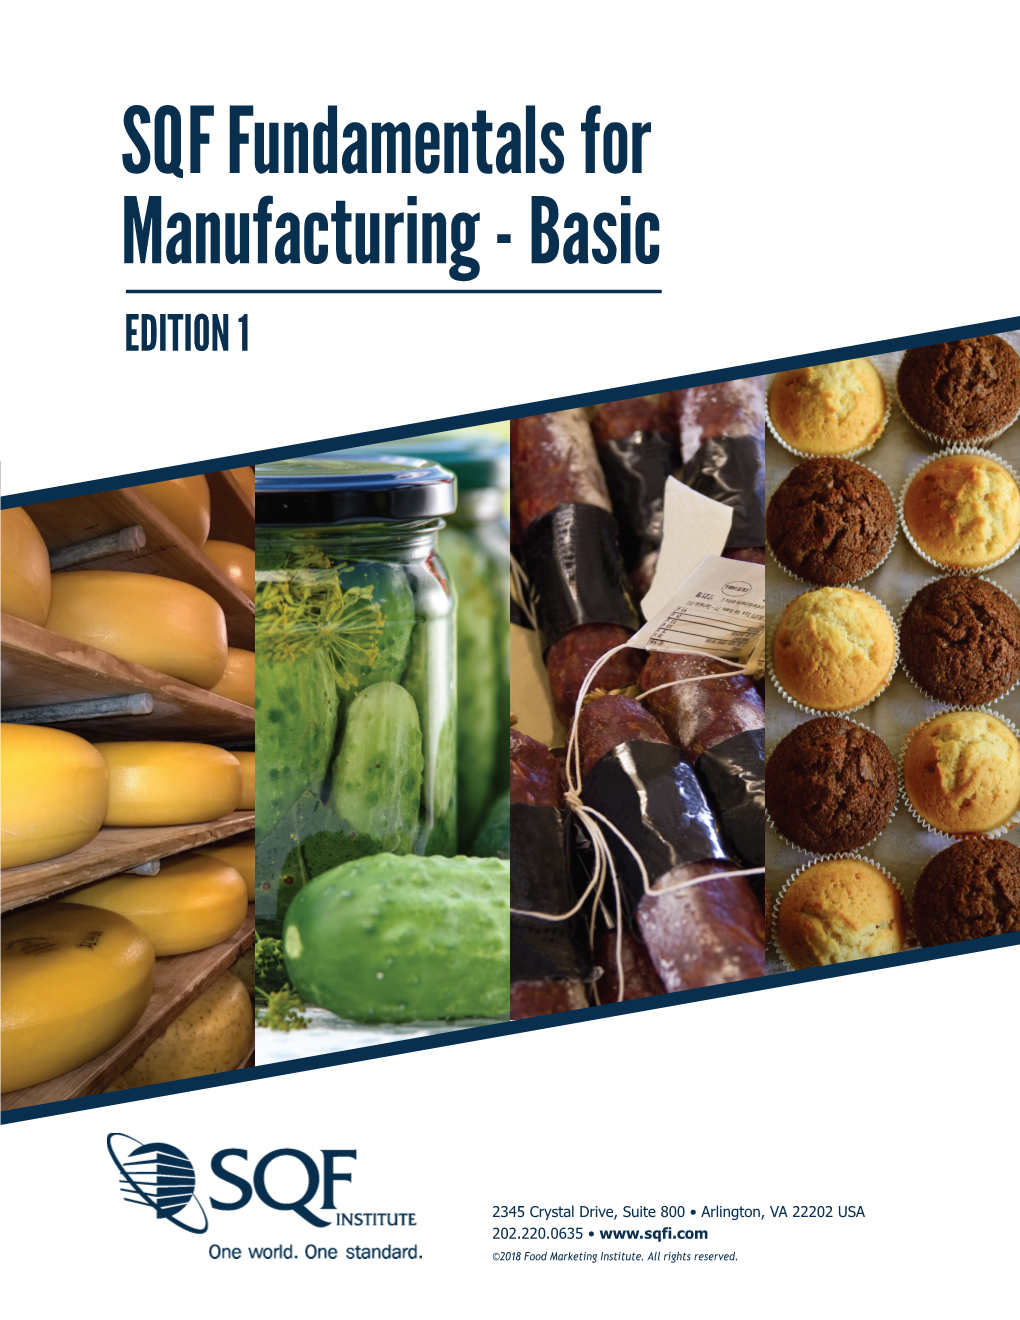 SQF Fundamentals for Manufacturing - Basic EDITION 1